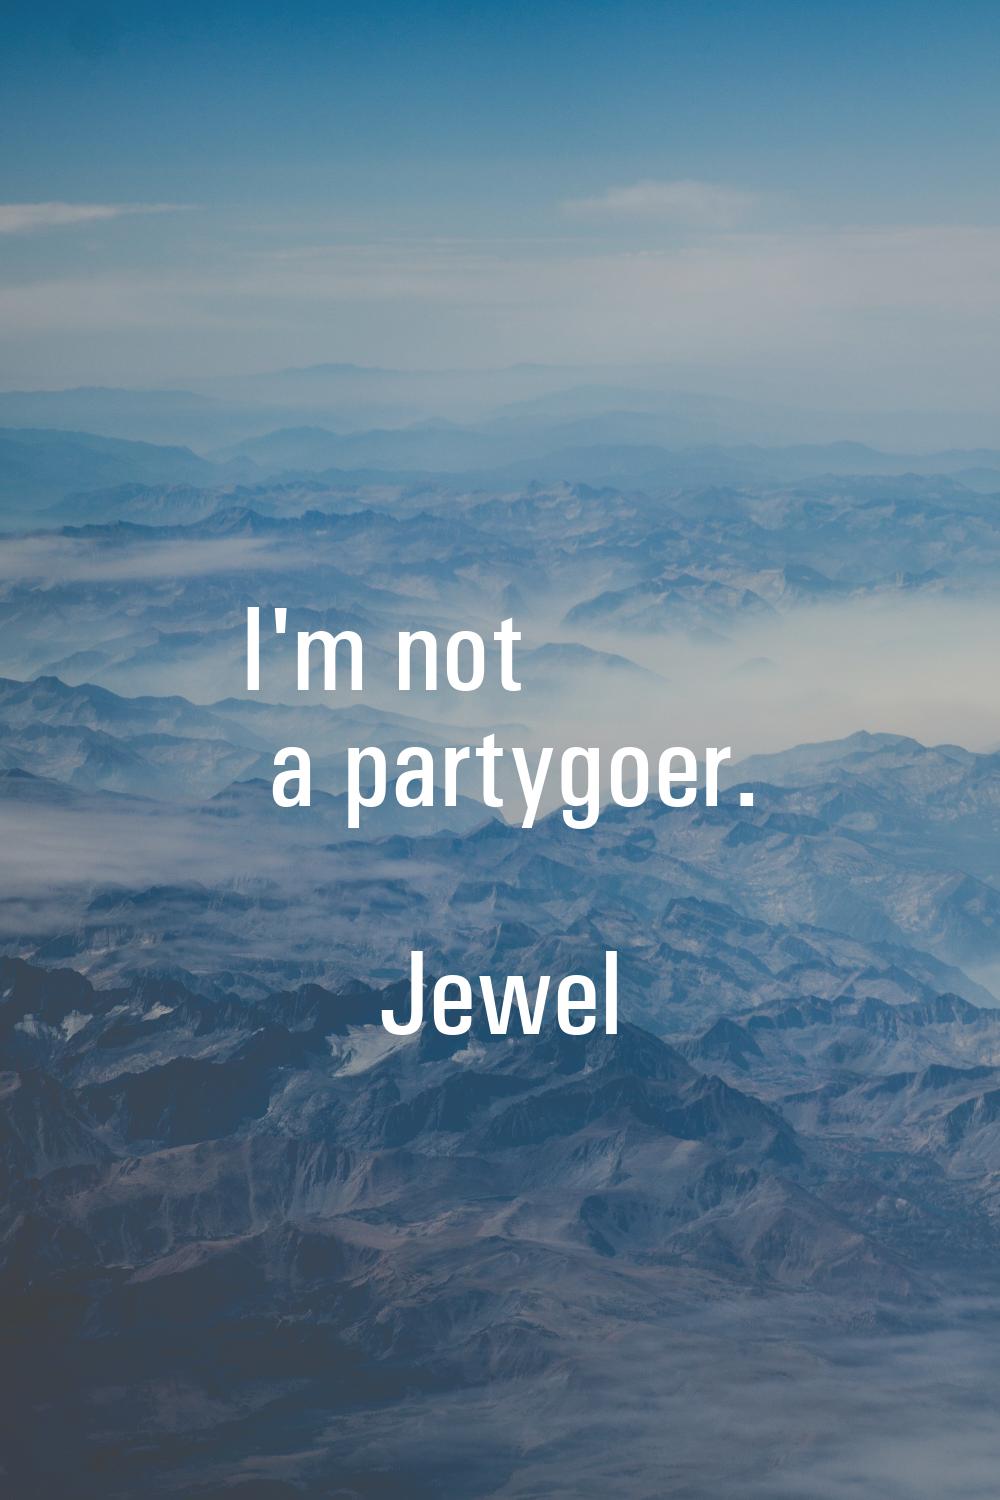 I'm not a partygoer.